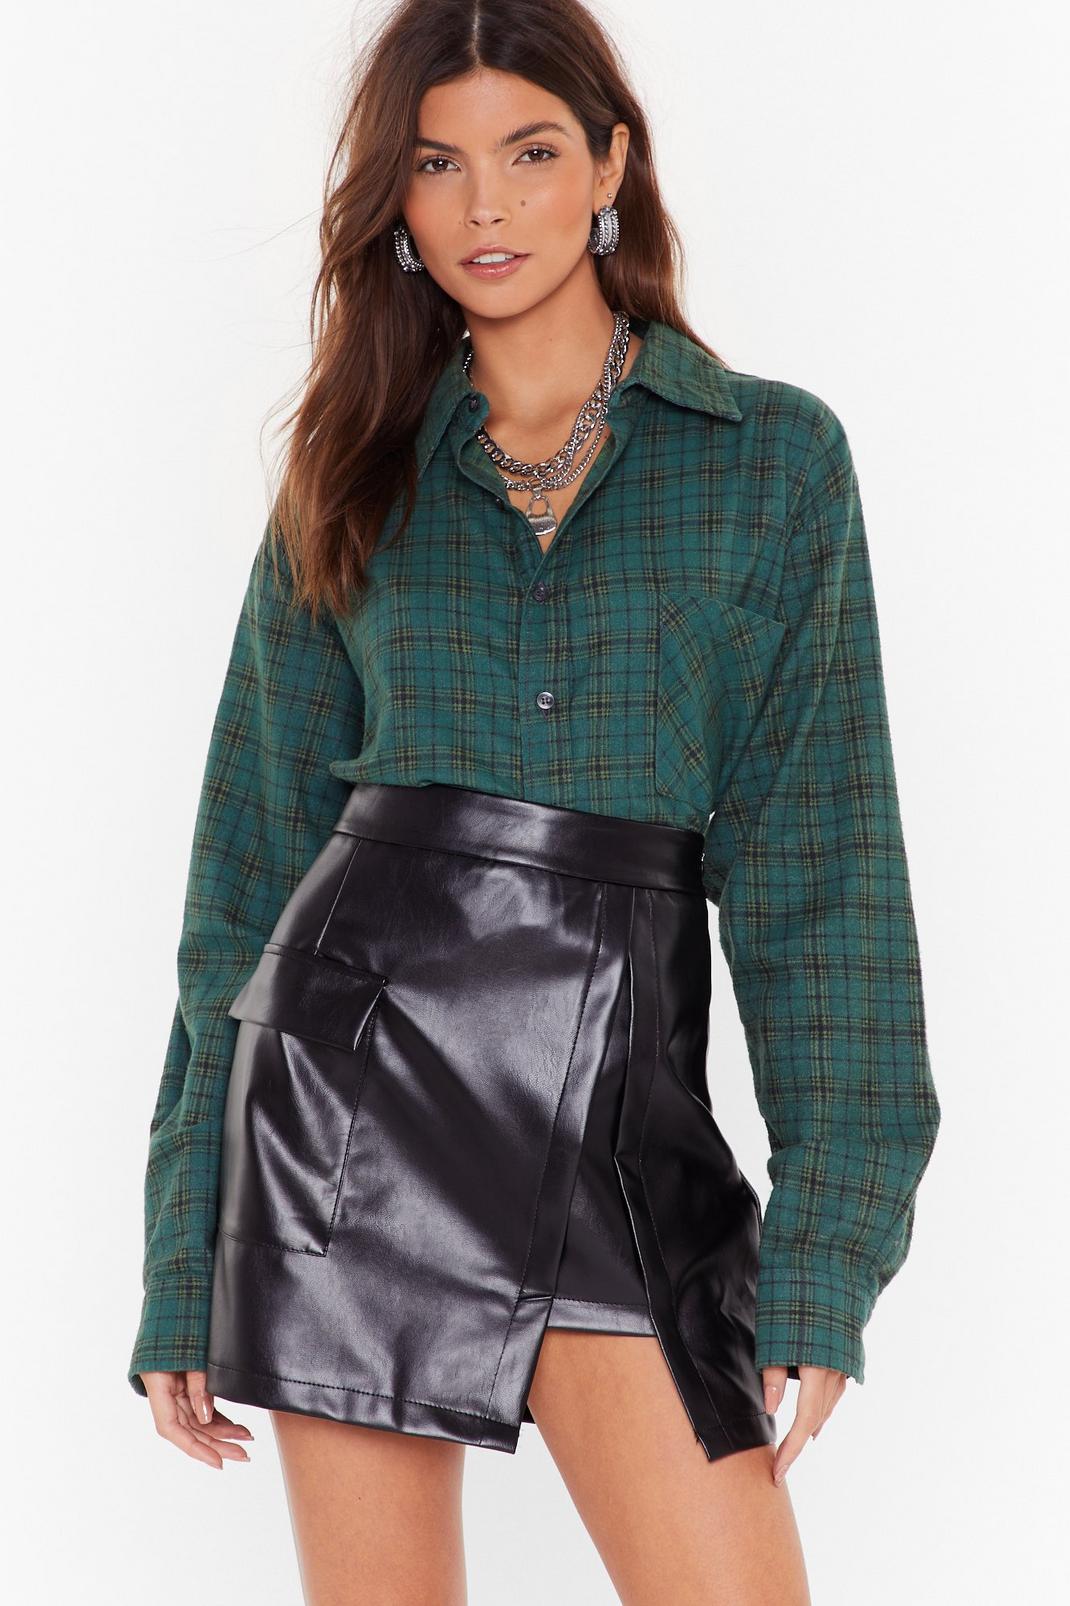 Slip of the Lip Faux Leather Mini Skirt image number 1